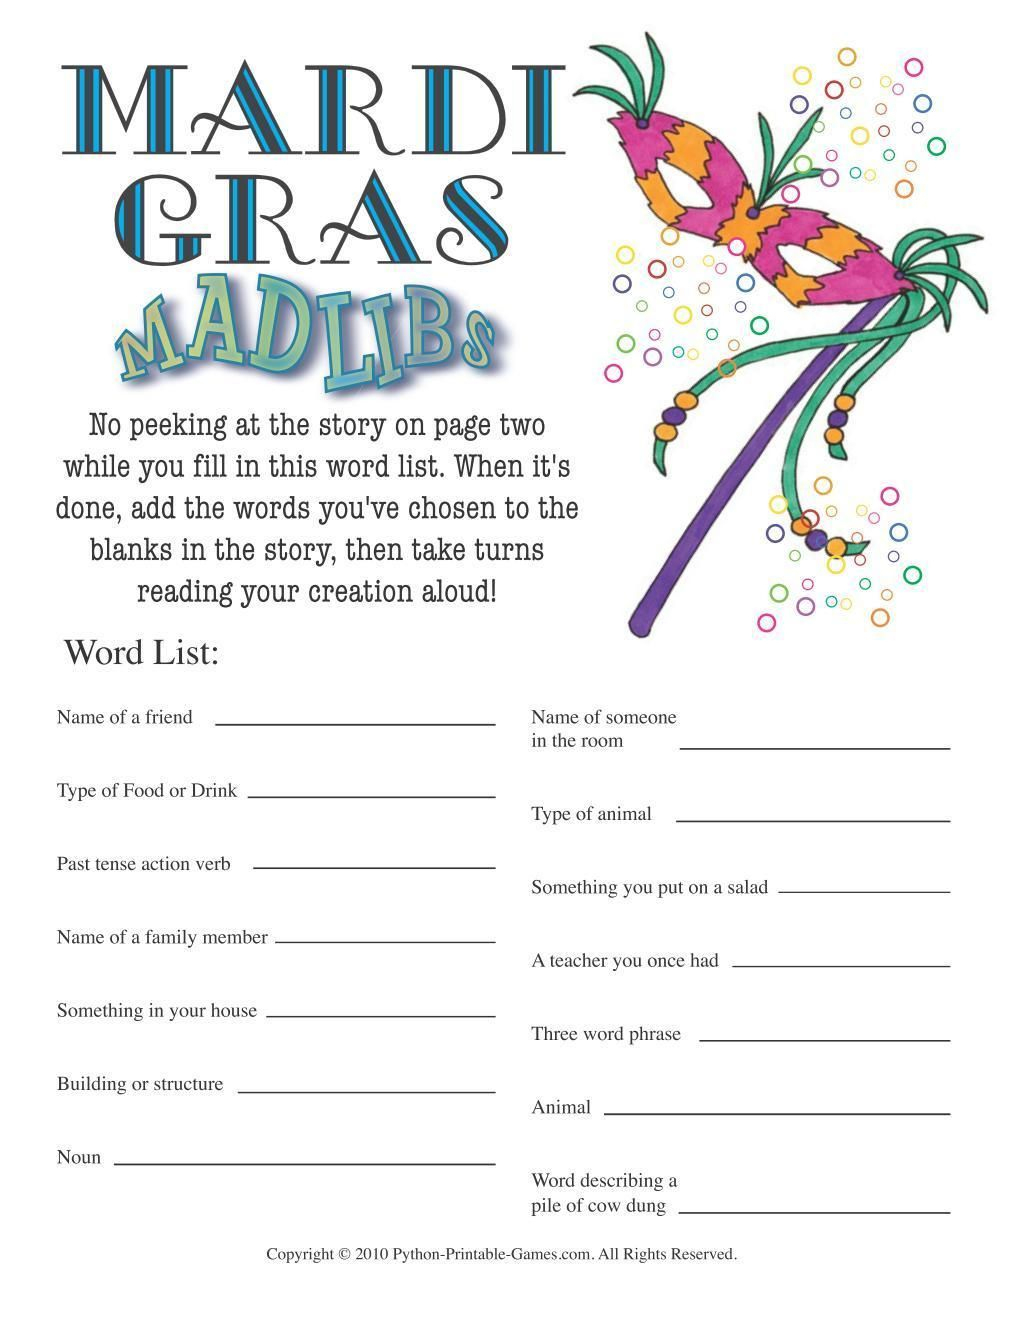 Frequently Asked Questions Contact - About Us All Our Games Blog - Free Printable Mardi Gras Games